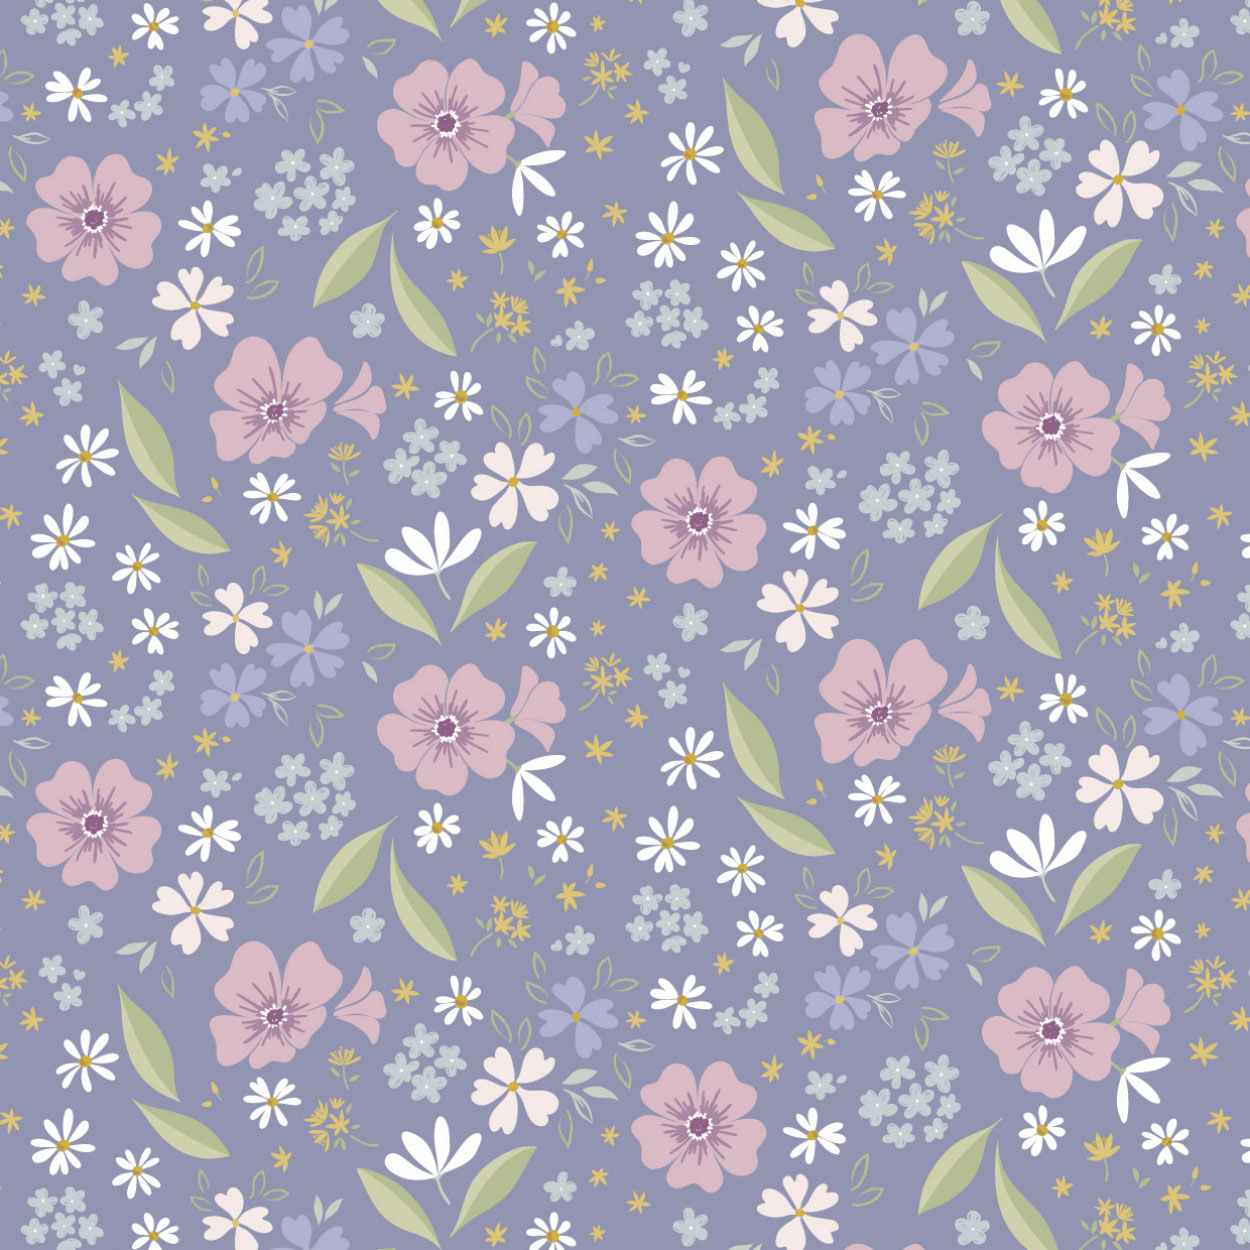 Floral Song By Cassandra Connolly For Lewis & Irene - Floral Art Lavender Blue